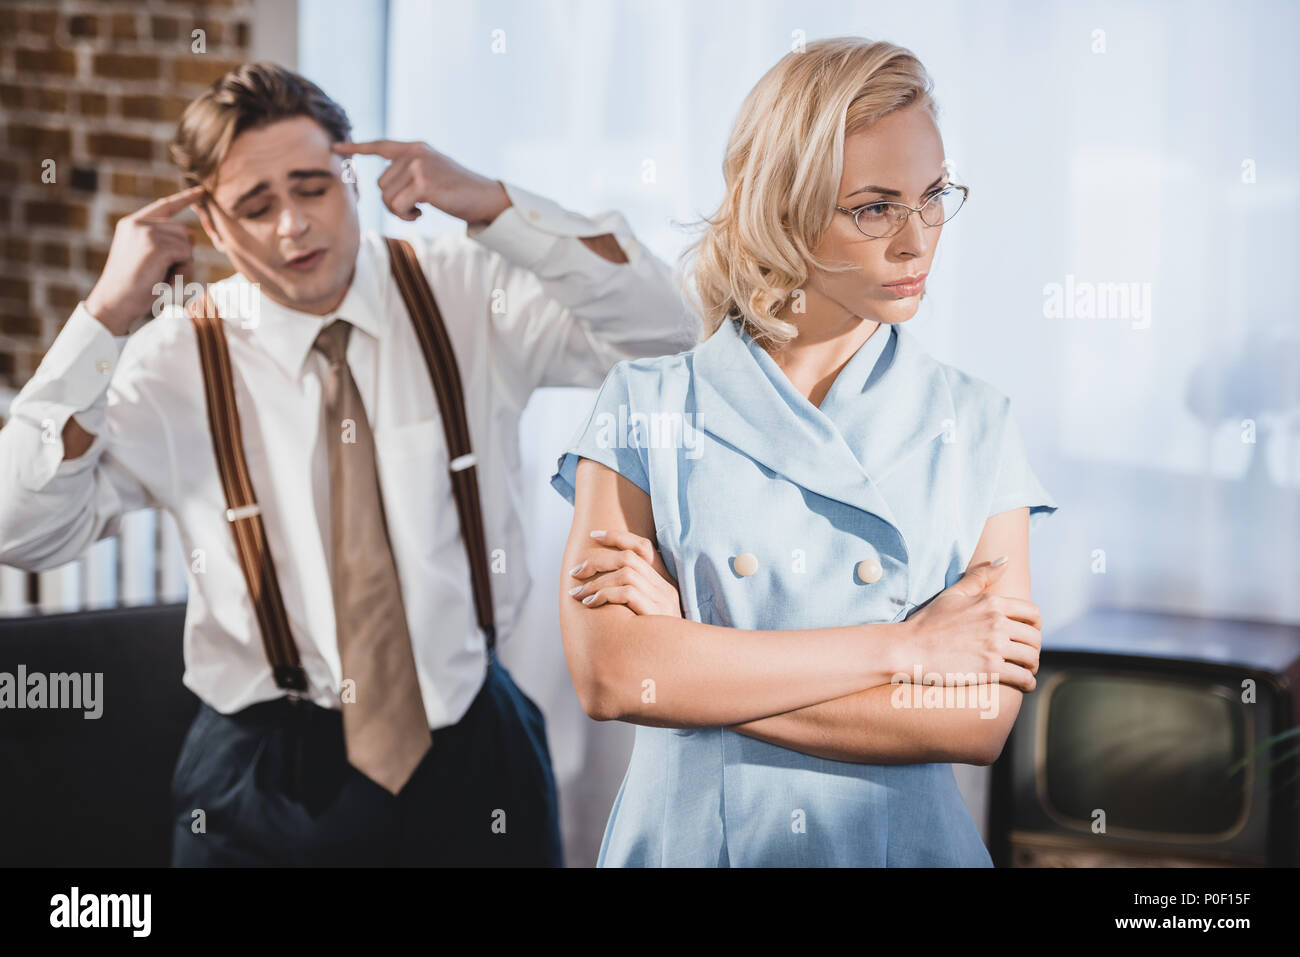 offended woman standing with crossed arms and looking away while emotional husband gesturing with hands behind, 1950s style Stock Photo